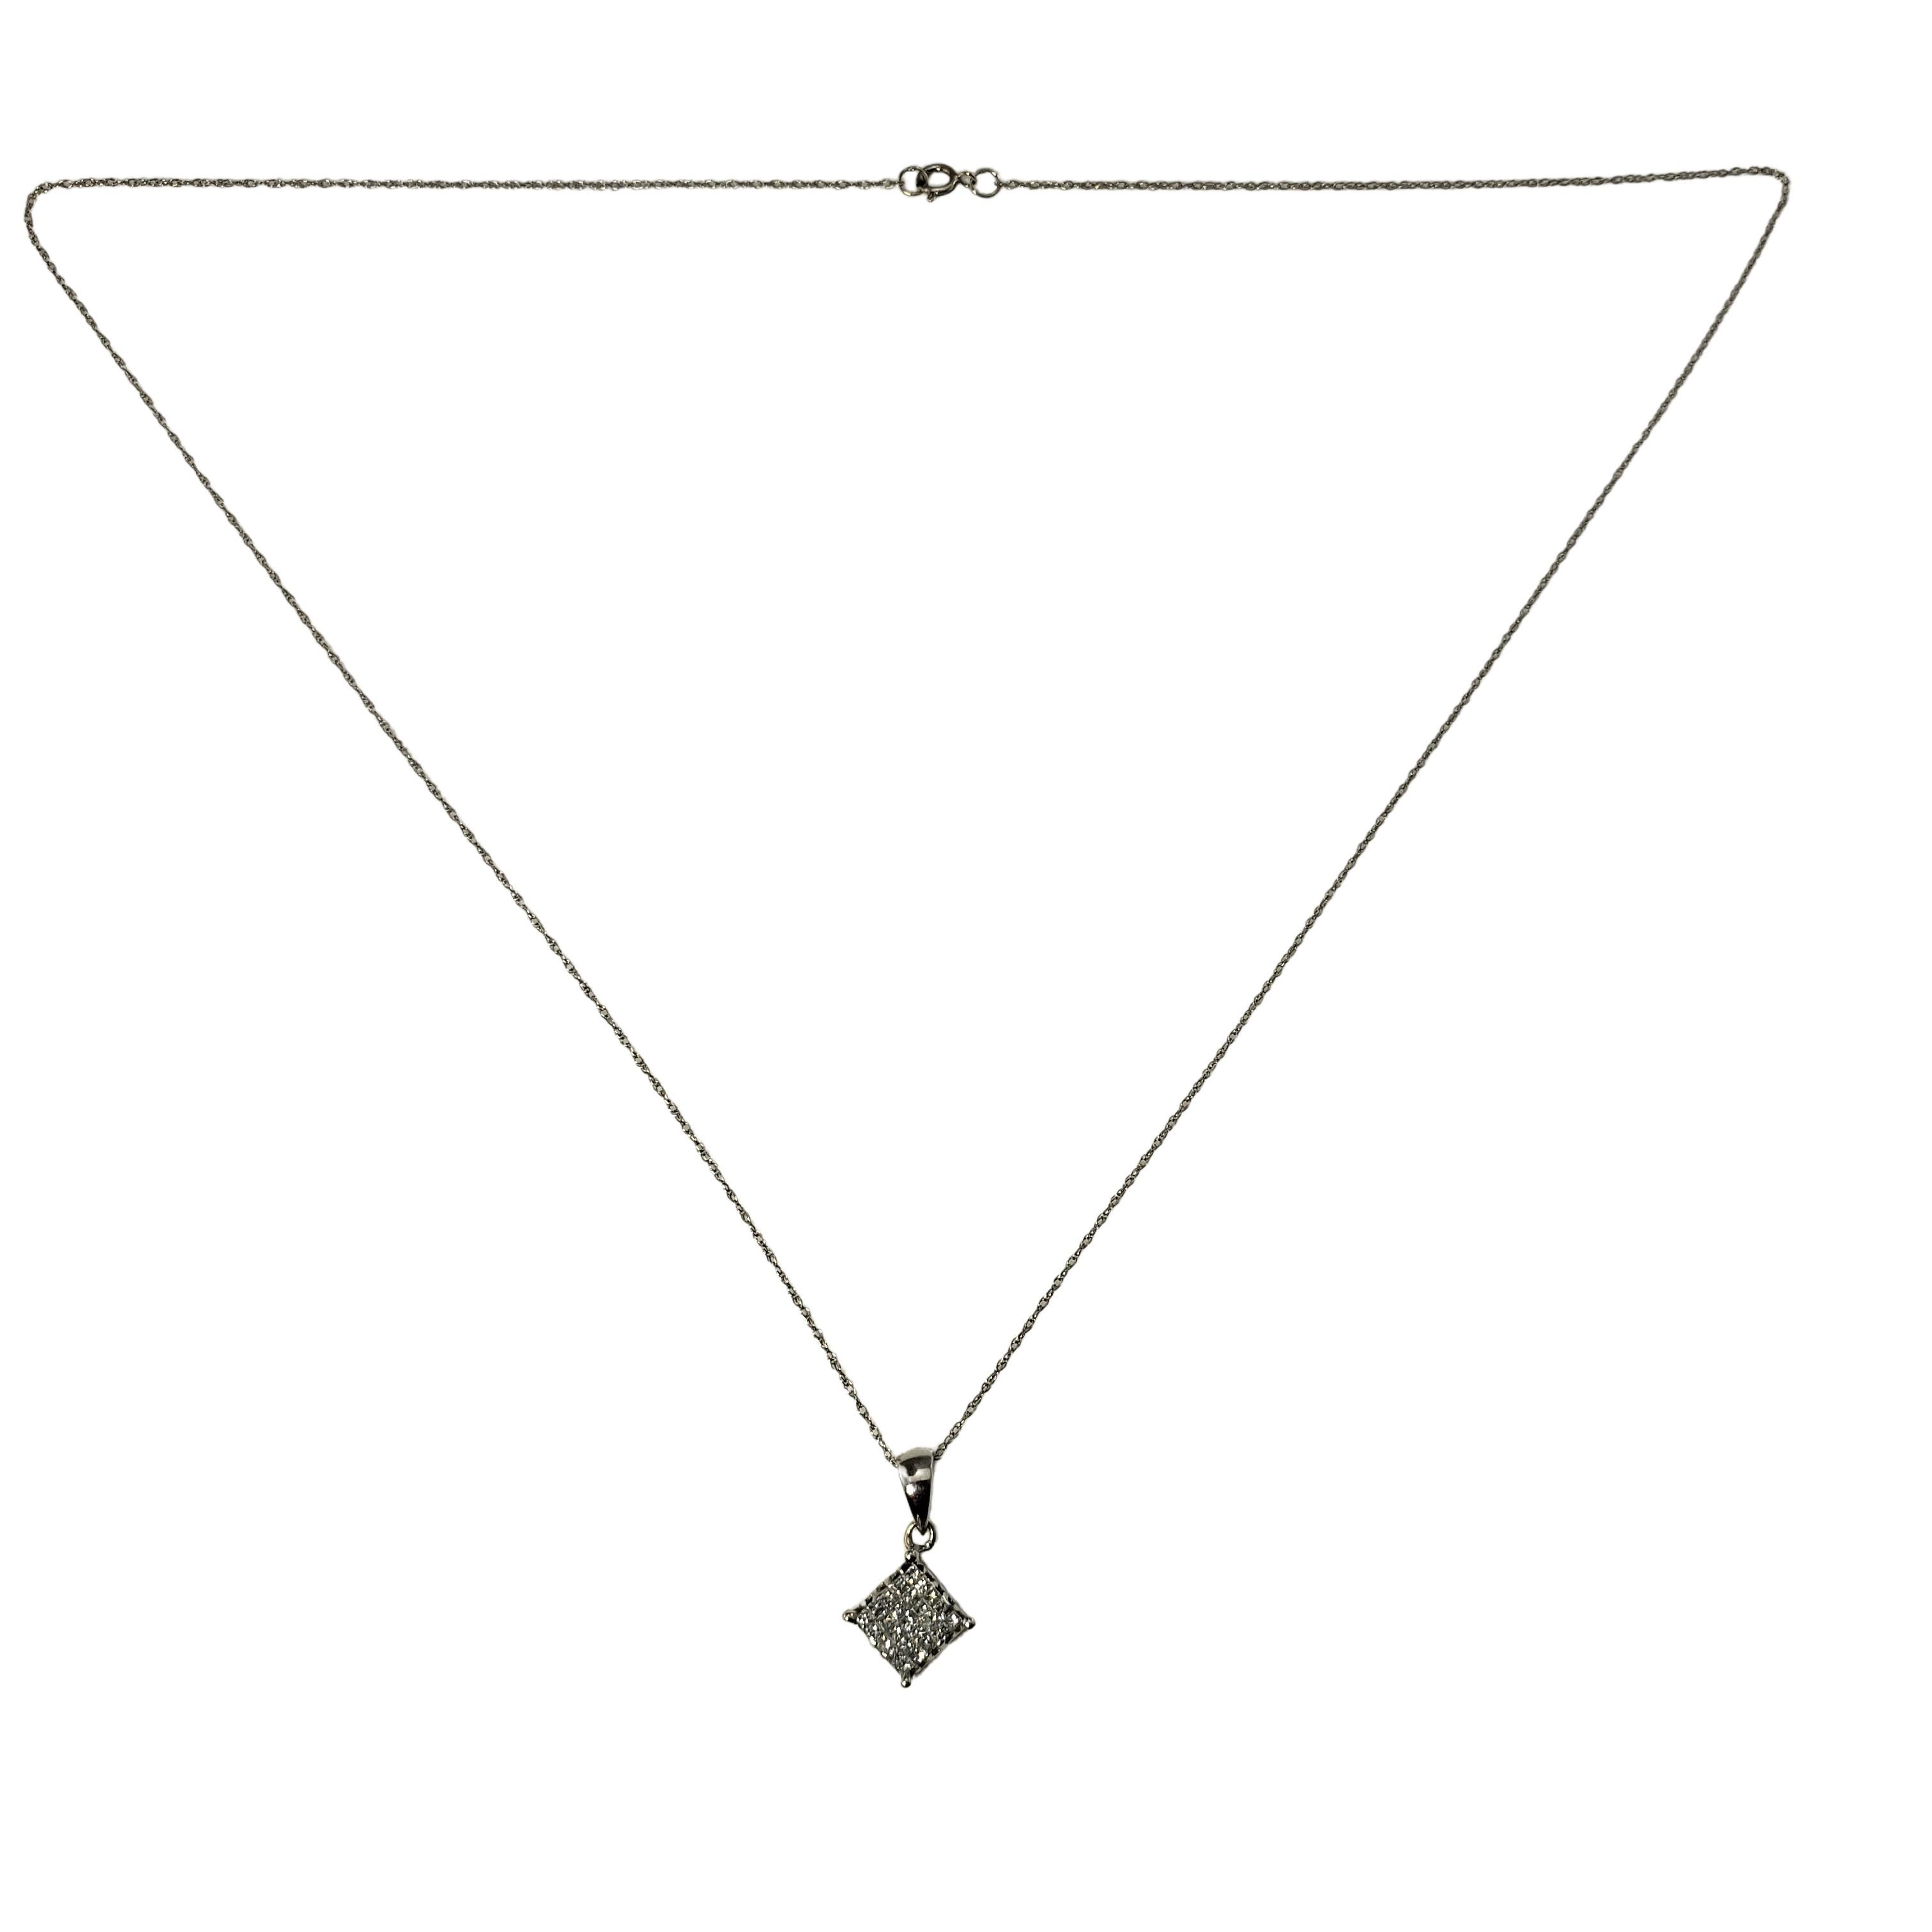 10 Karat White Gold Diamond Pendant Necklace-

This sparkling pendant necklace features 25 princess cut diamonds set in classic 10K white gold.

Approximate total diamond weight:  .25 ct.

Diamond color: H

Diamond clarity: SI1

Size: 17.5 inches